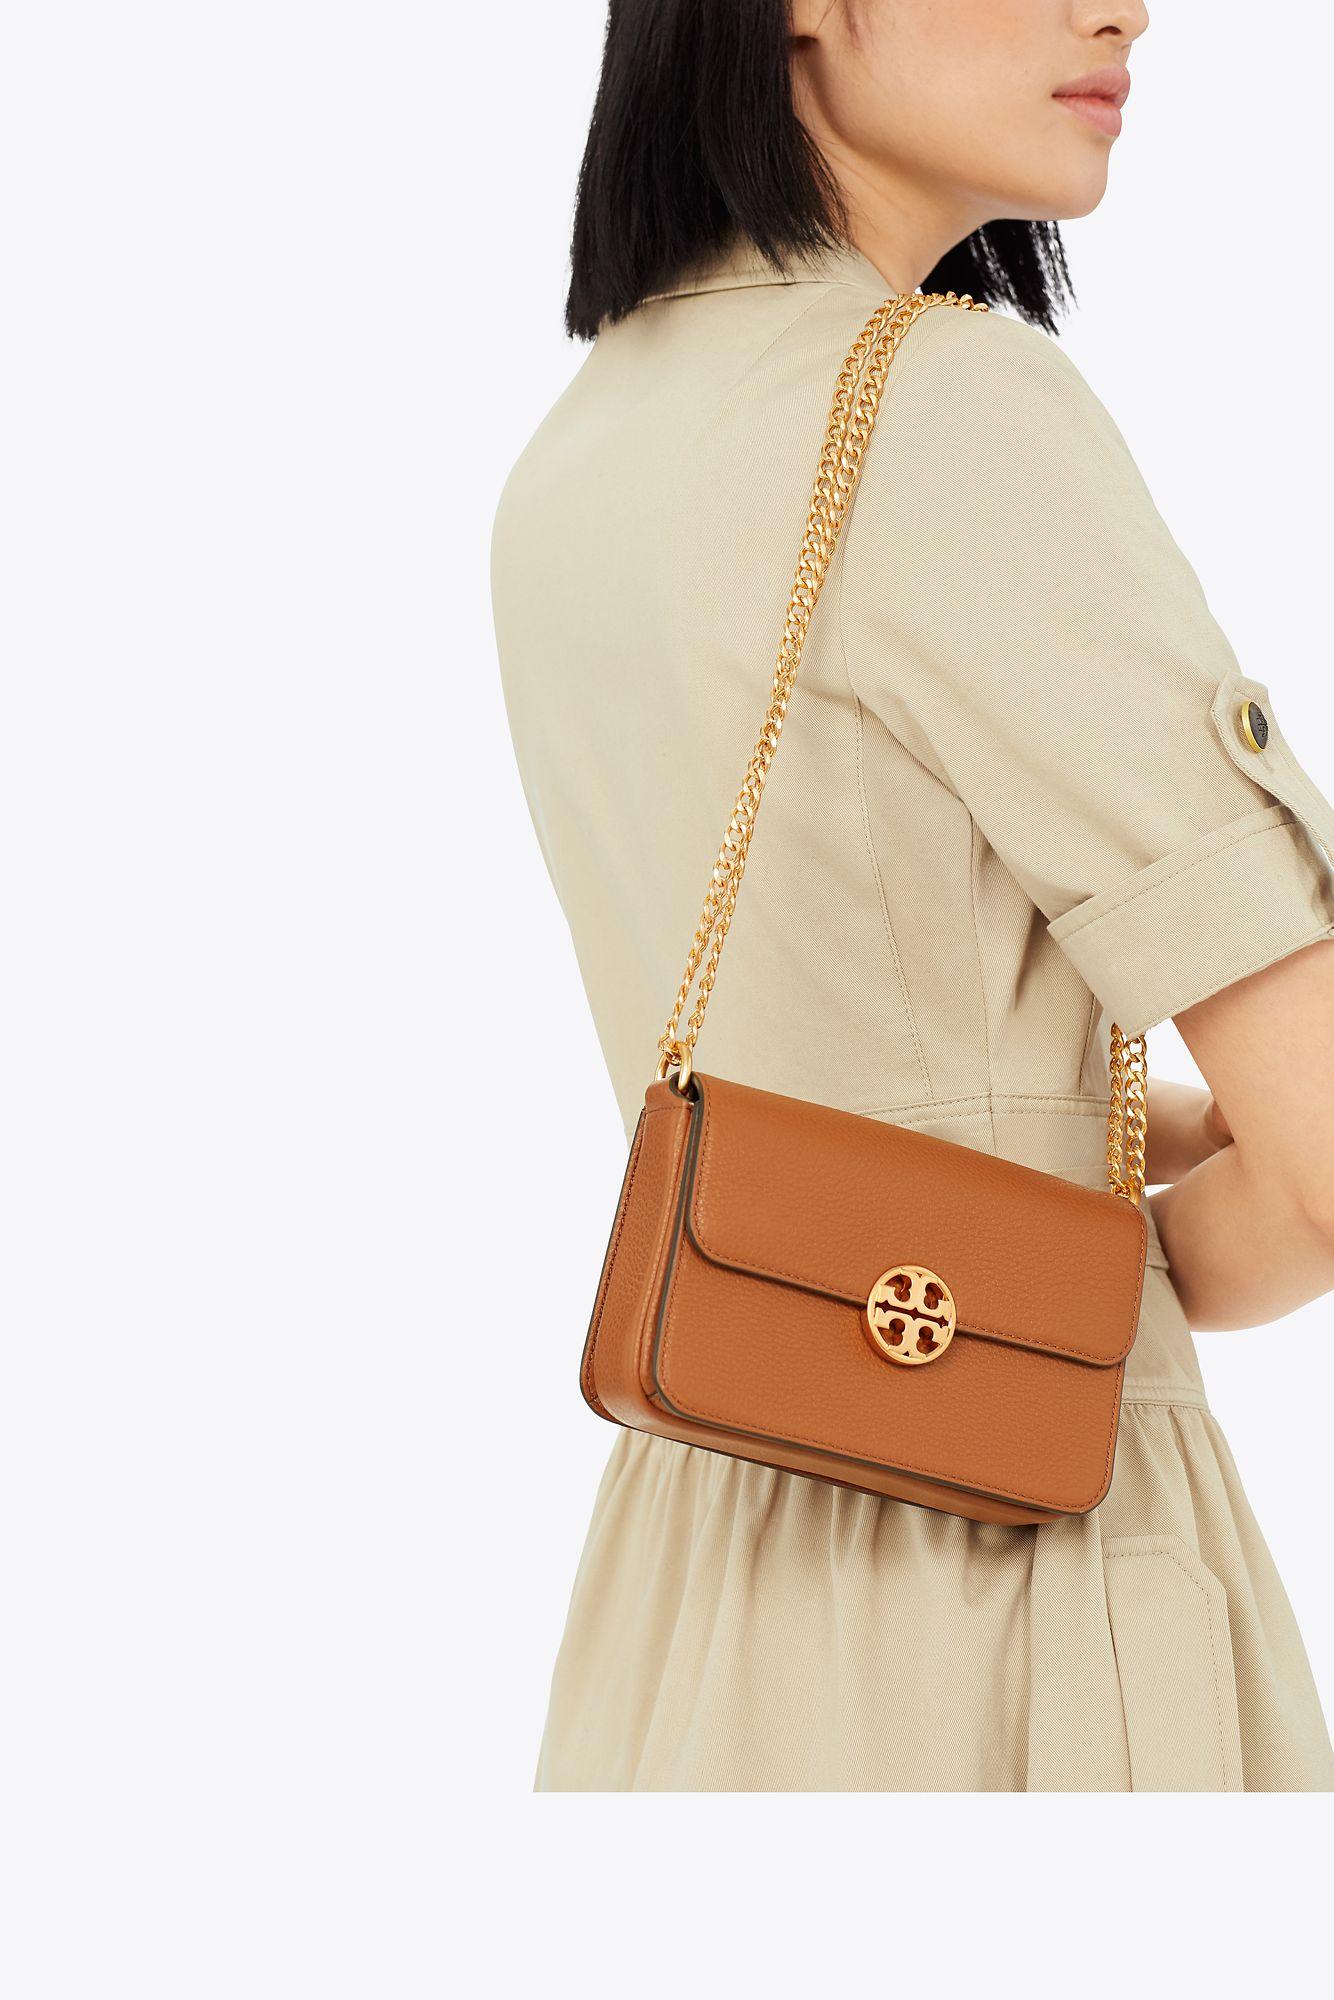 Tory Burch Chelsea Mini Leather Bag in Brown | Lyst